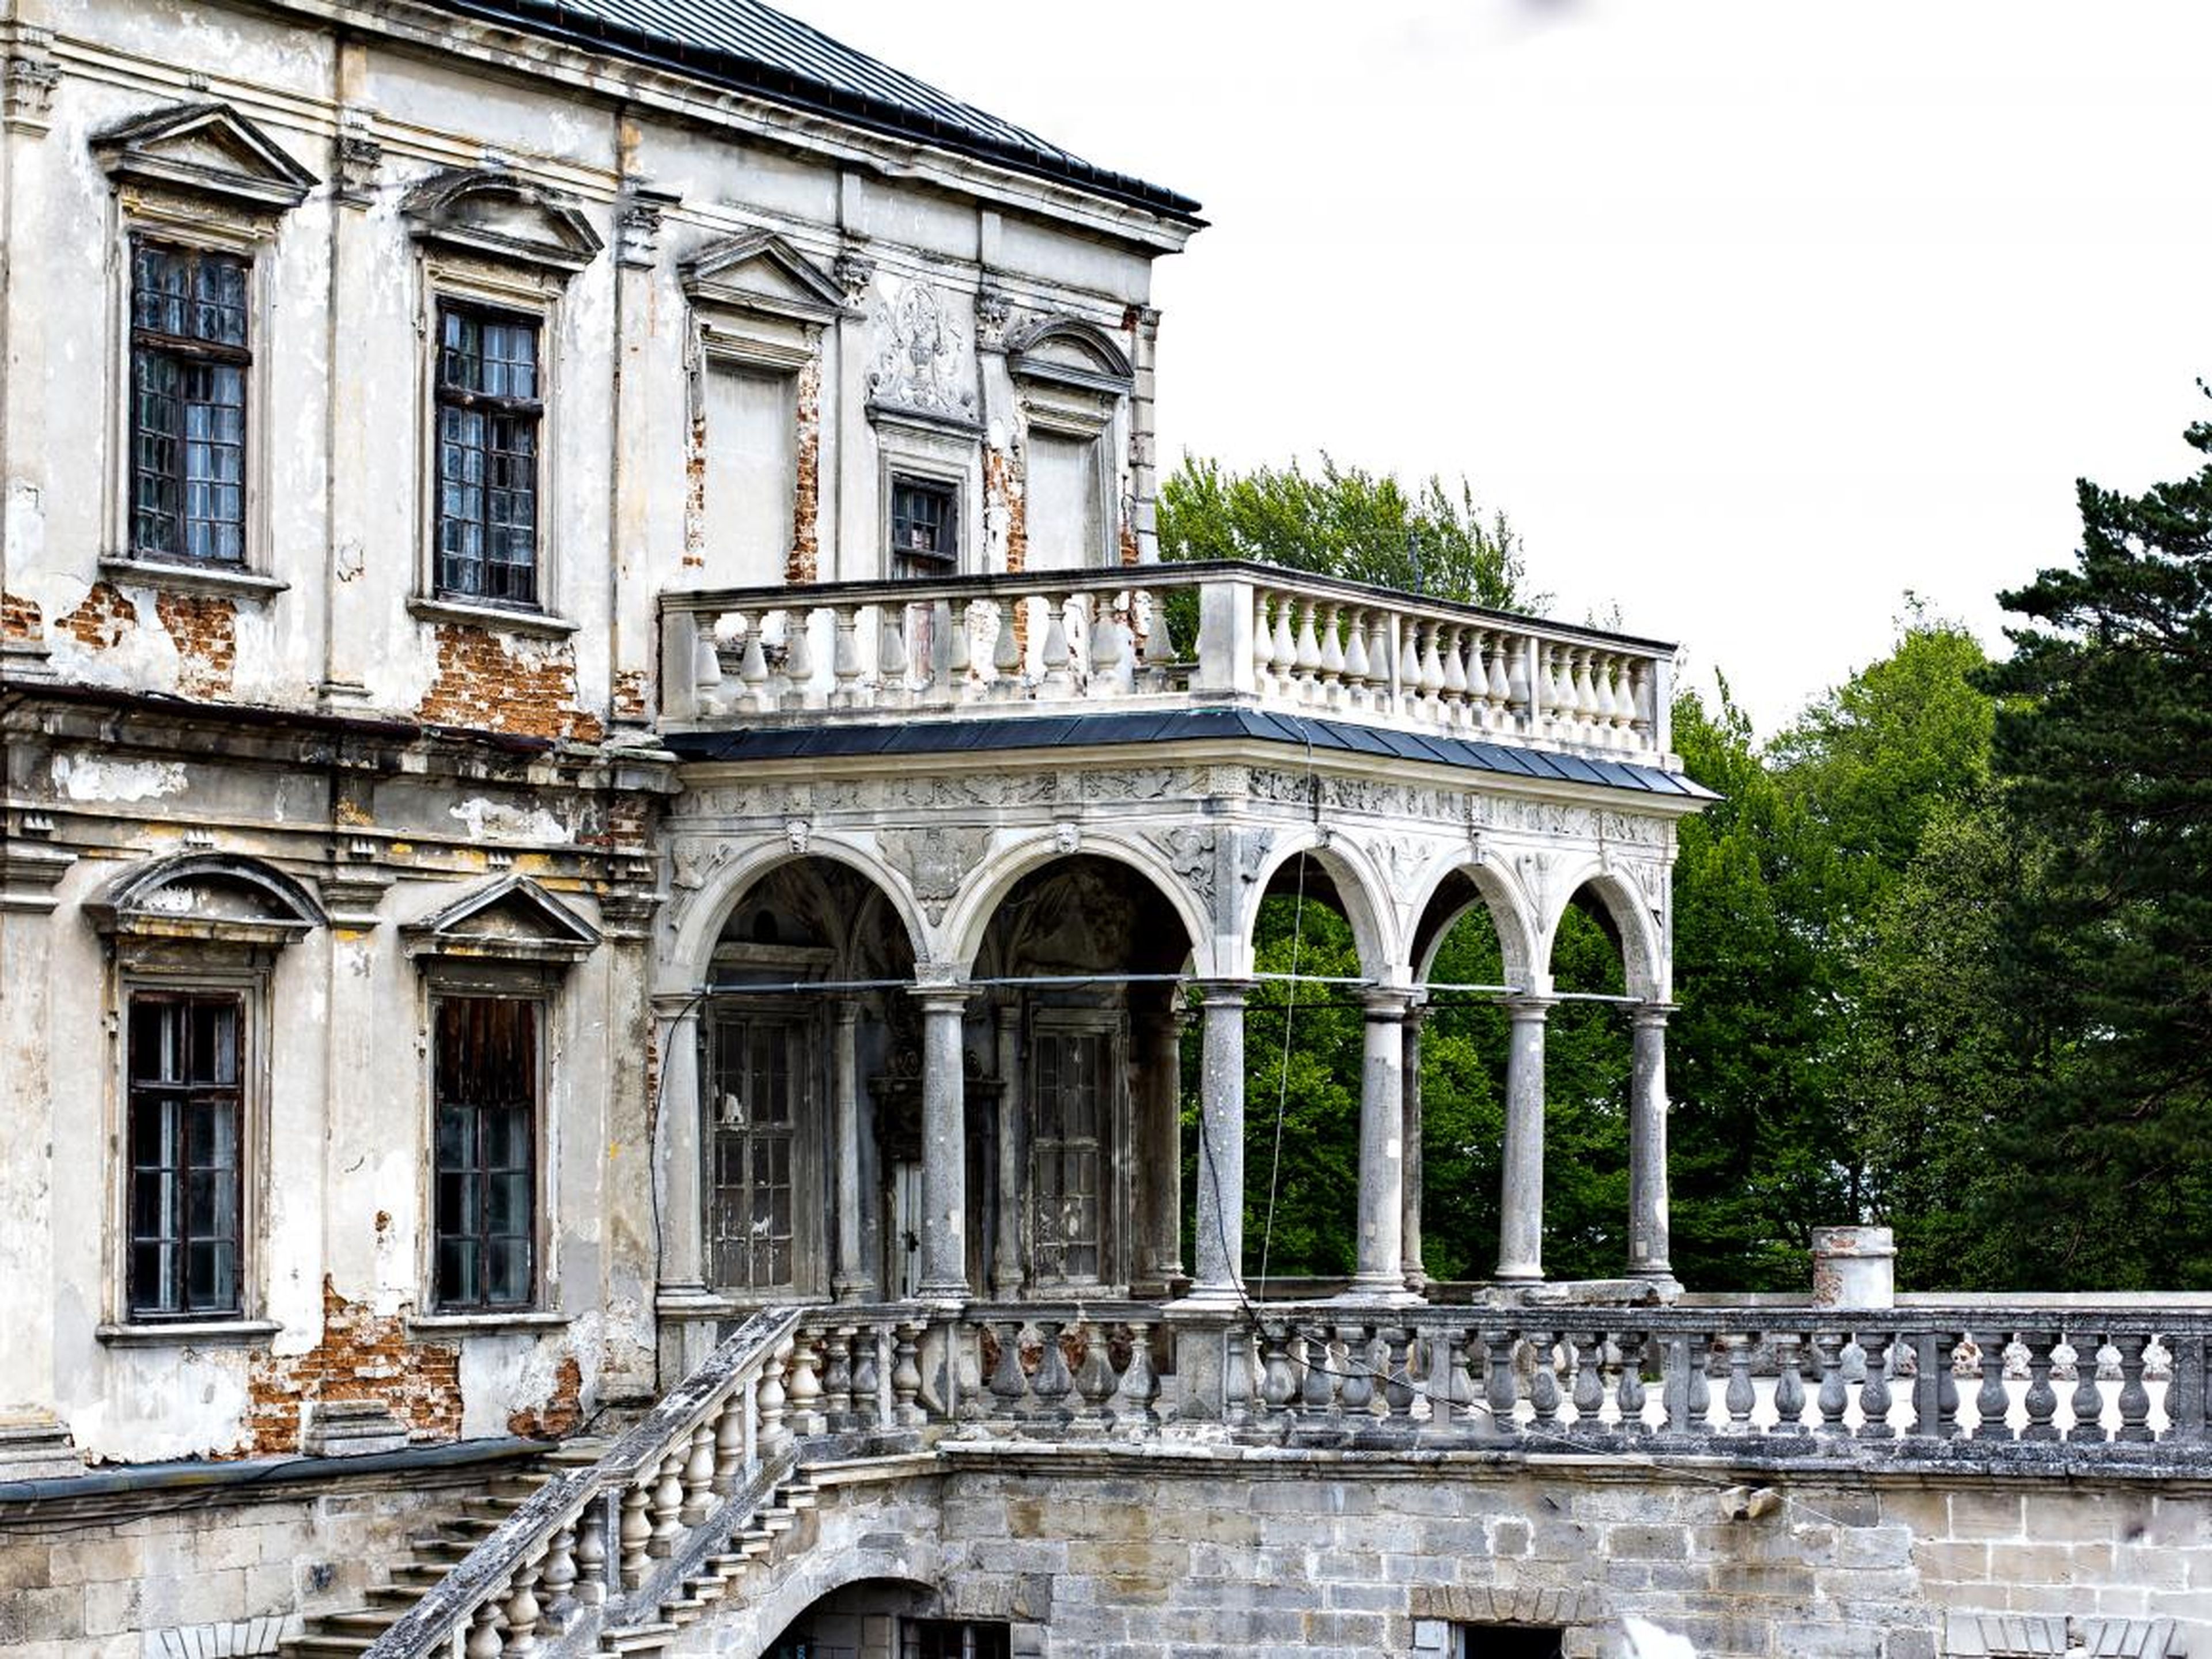 The mansion prospered for years, but in the 19th century, new owners took over and neglected the castle, so that by the end of World War II, it had massively deteriorated.